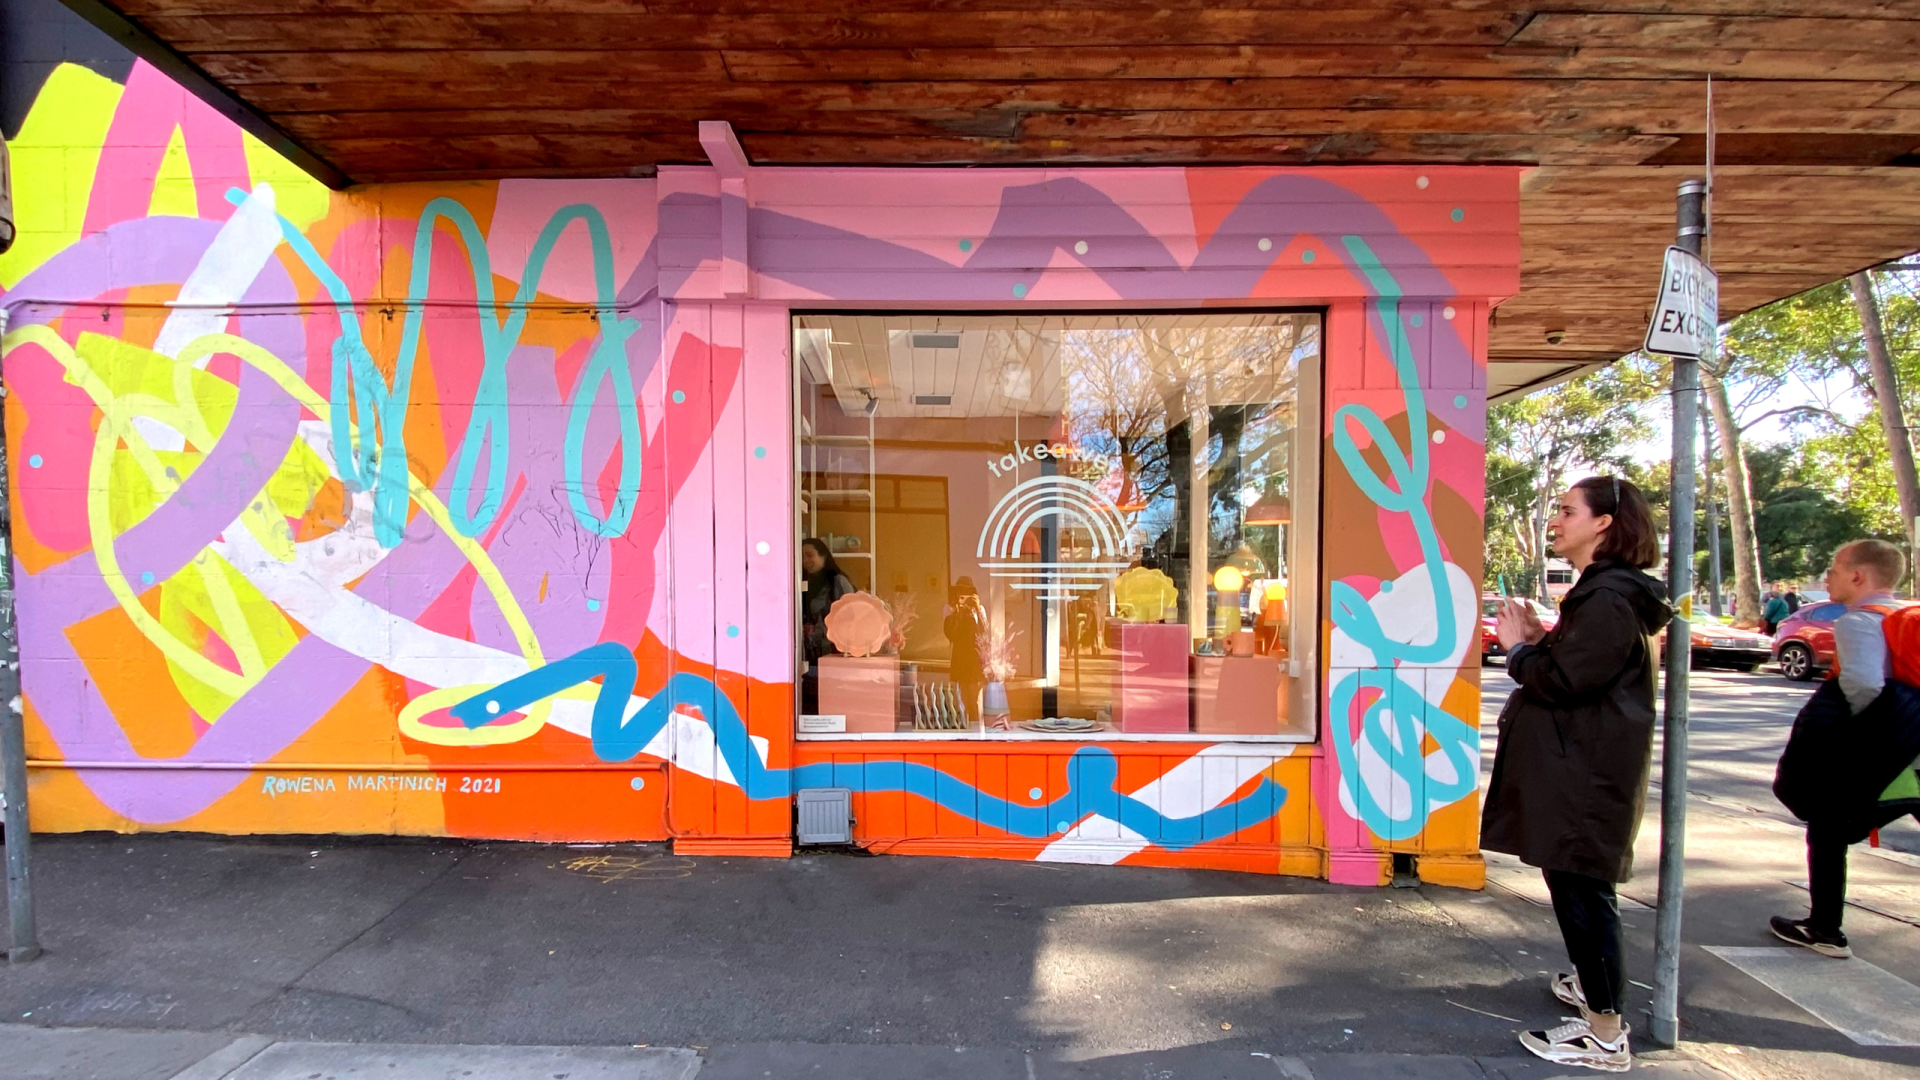 Brand experience in public space, mural by Rowena Martinich